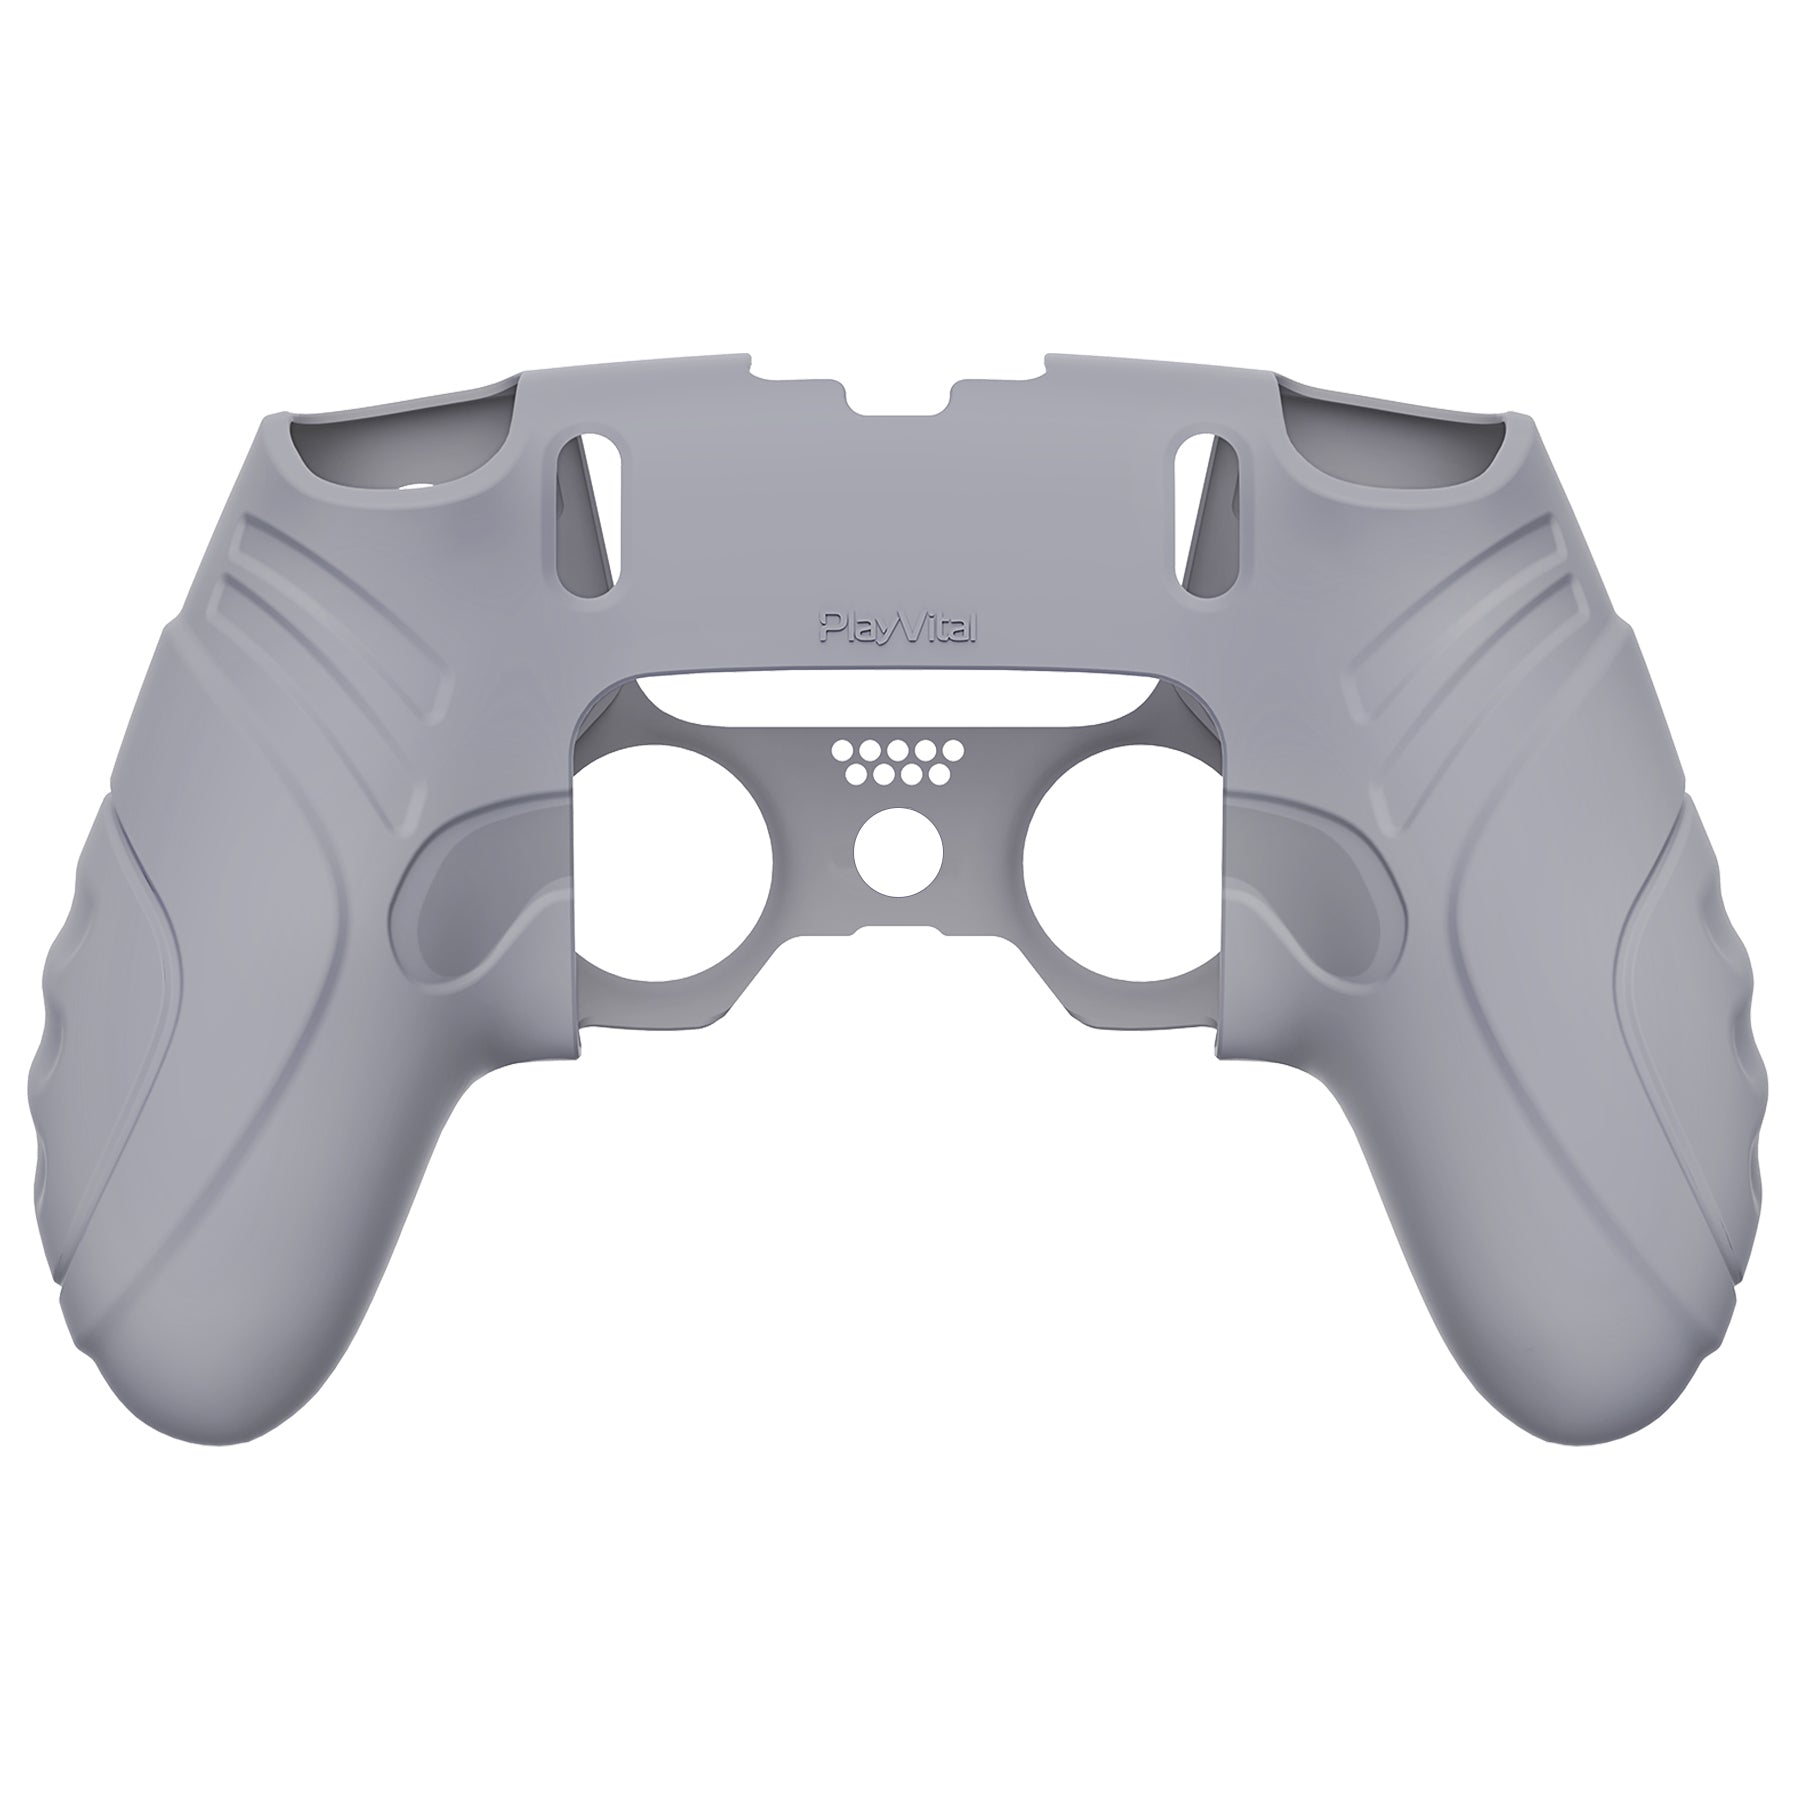 PlayVital Guardian Edition Anti-Slip Ergonomic Silicone Cover Case with Thumb Grip Caps for PS5 Edge Controller - Metallic Gray - EHPFP011 PlayVital